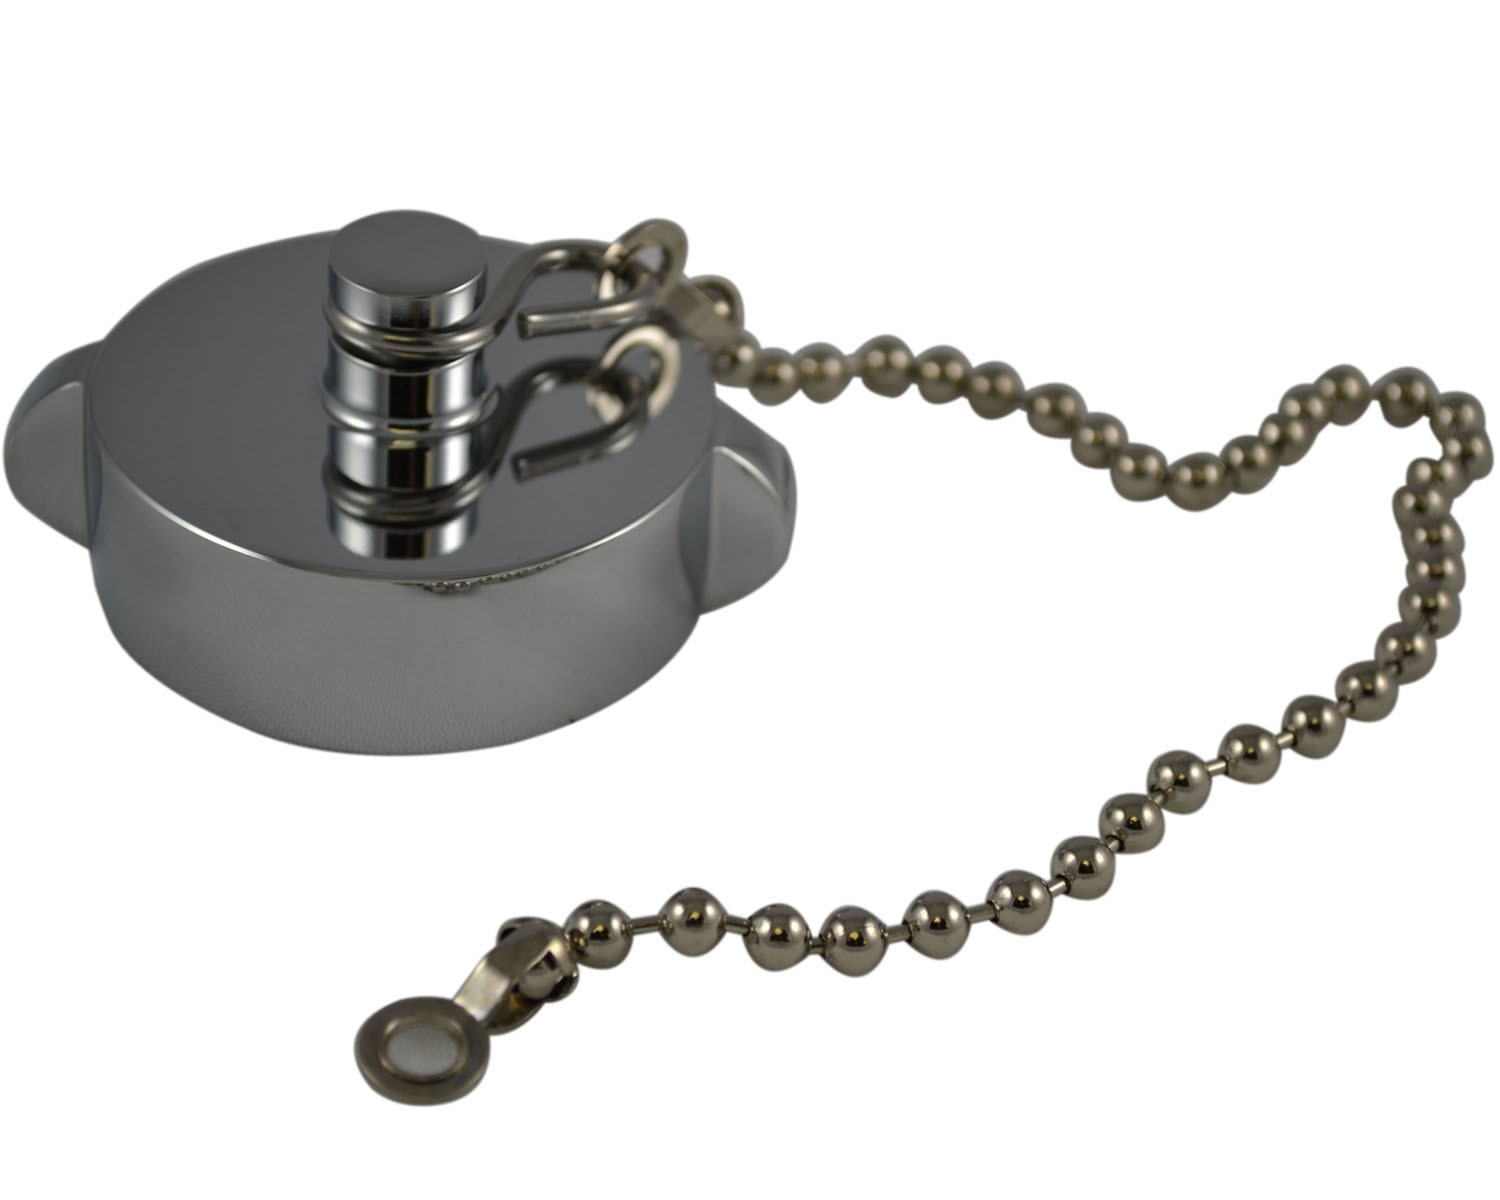 HCC28, 1.5 National Standard Thread ( NST) Female Cap Brass Chrome Plated with Chain, Rockerlug Tested to 500 psi